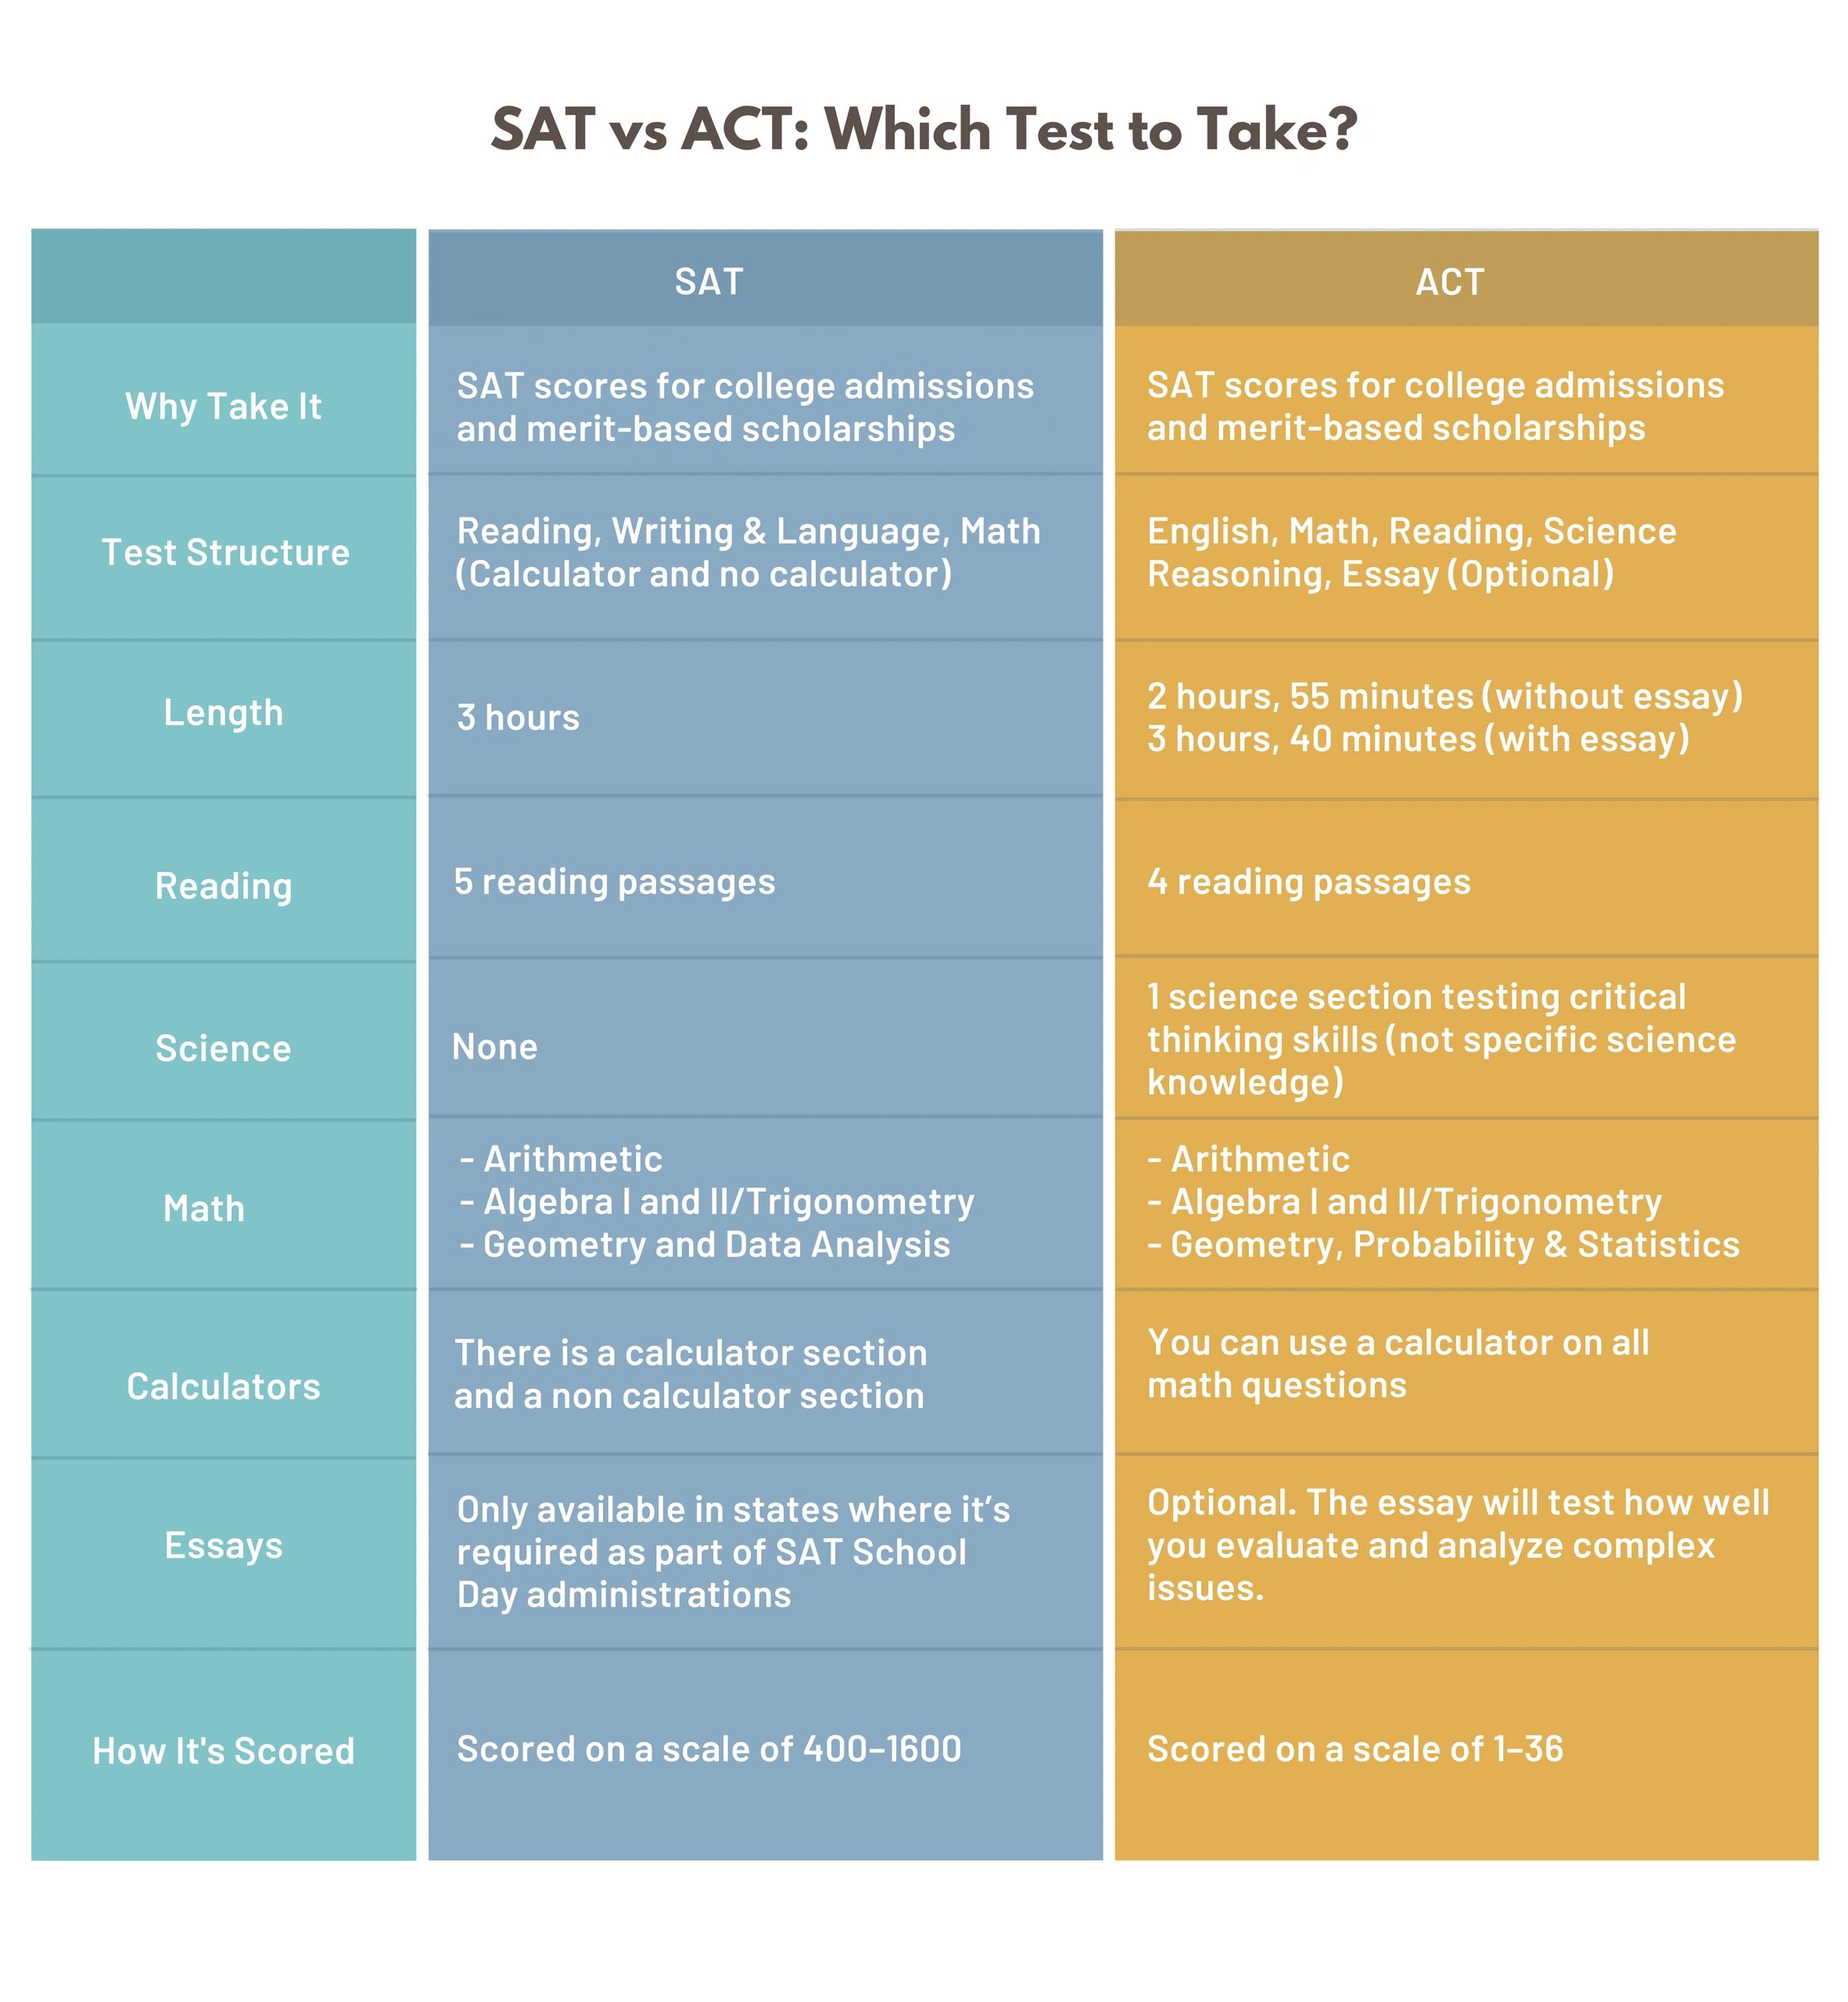 SAT vs. ACT Which Test Should I Take?